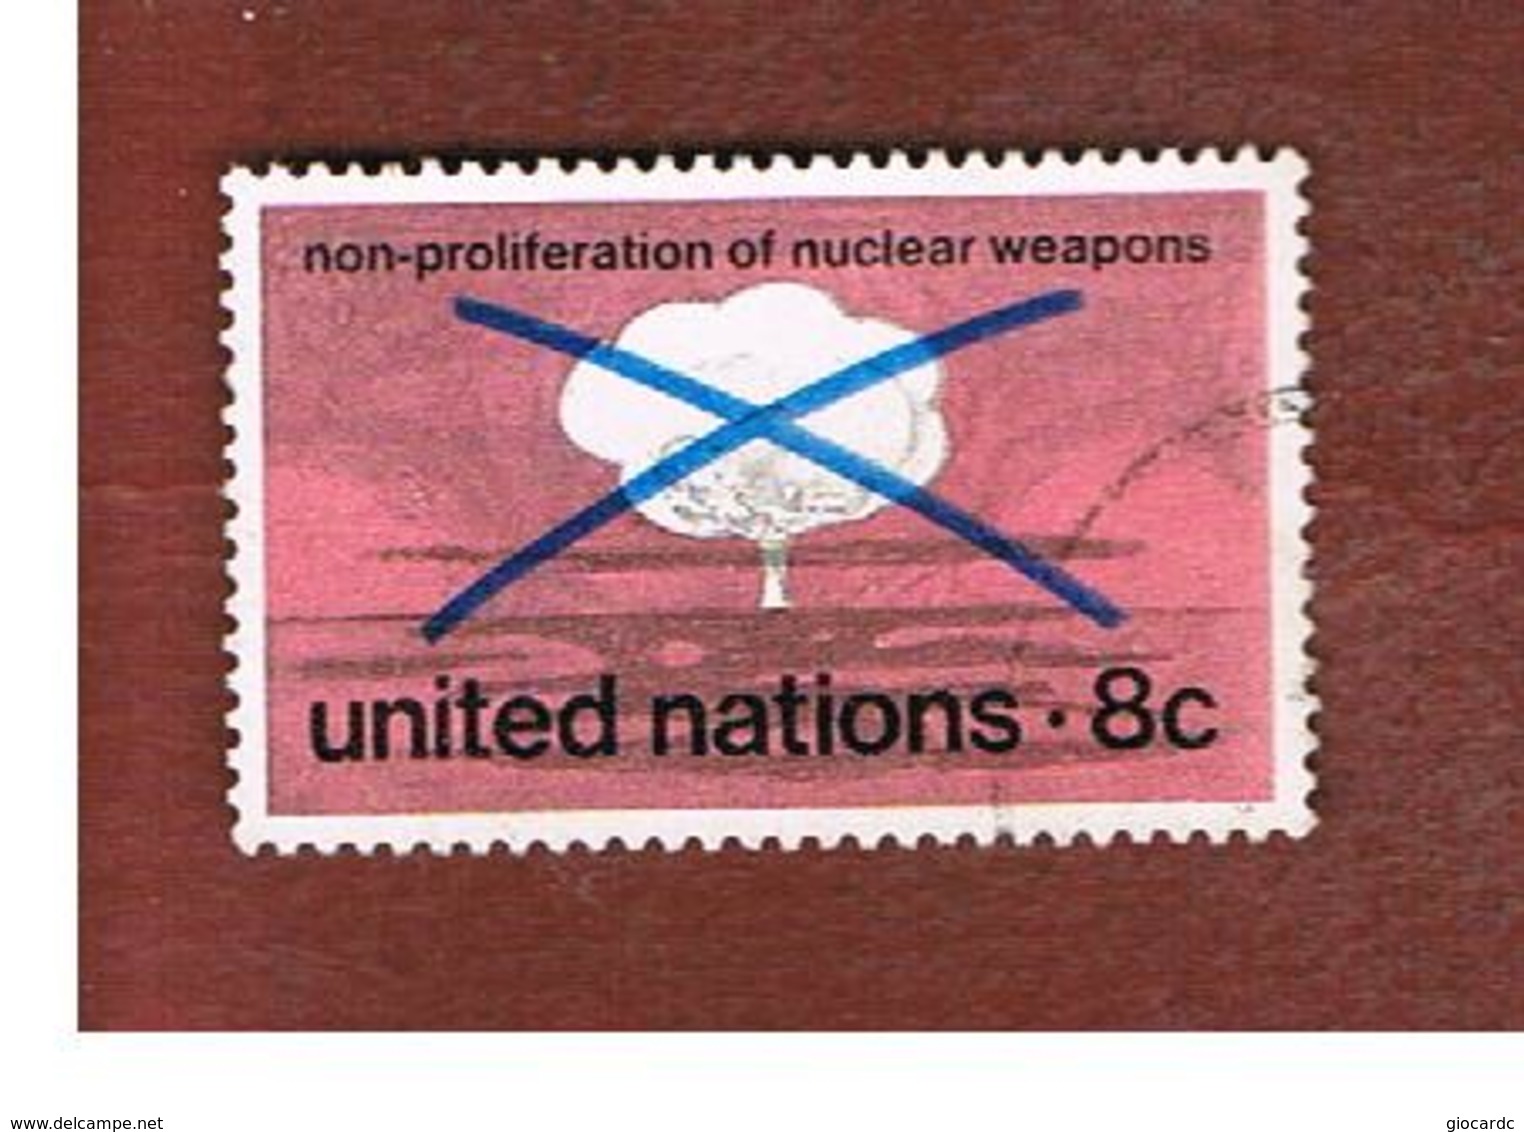 ONU (UNITED NATIONS) NEW YORK   - SG NY227   -  1972 NON-PROLIFERATION OF NUCLEAR   WEAPONS    - USED - Used Stamps